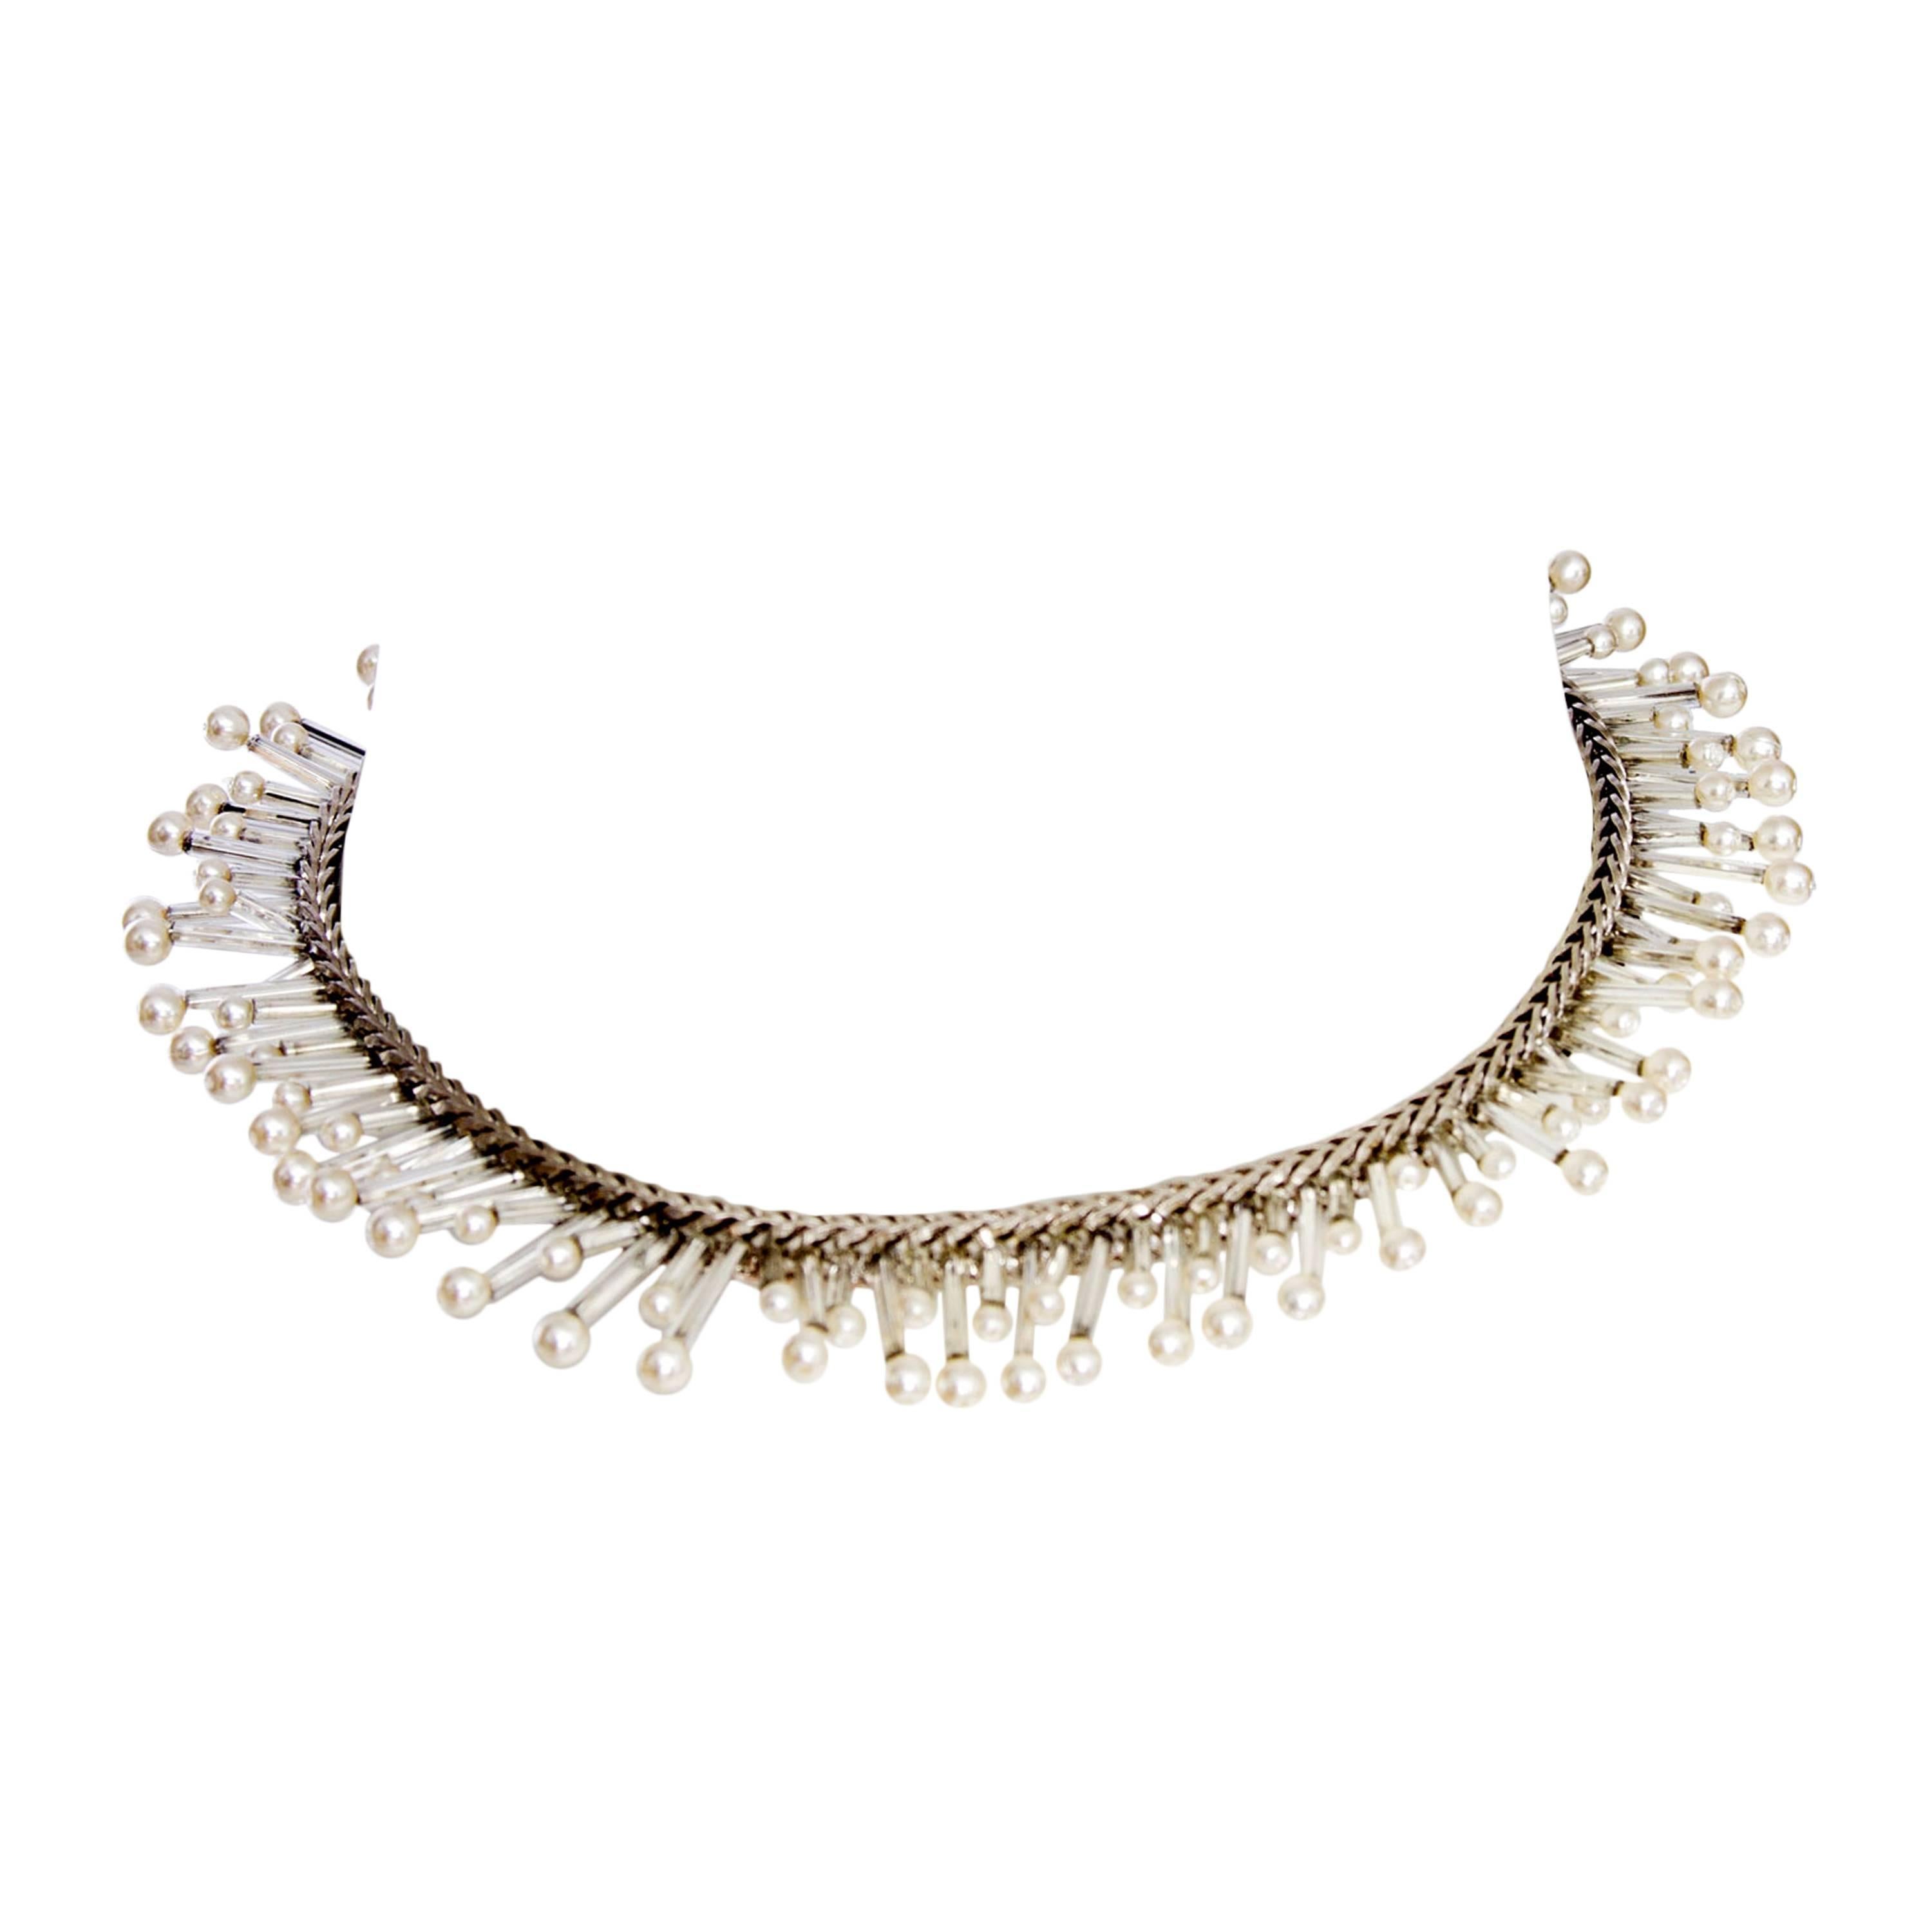 Chanel Silver Beaded Mother-of-Pearl Choker Necklace, 1990s 